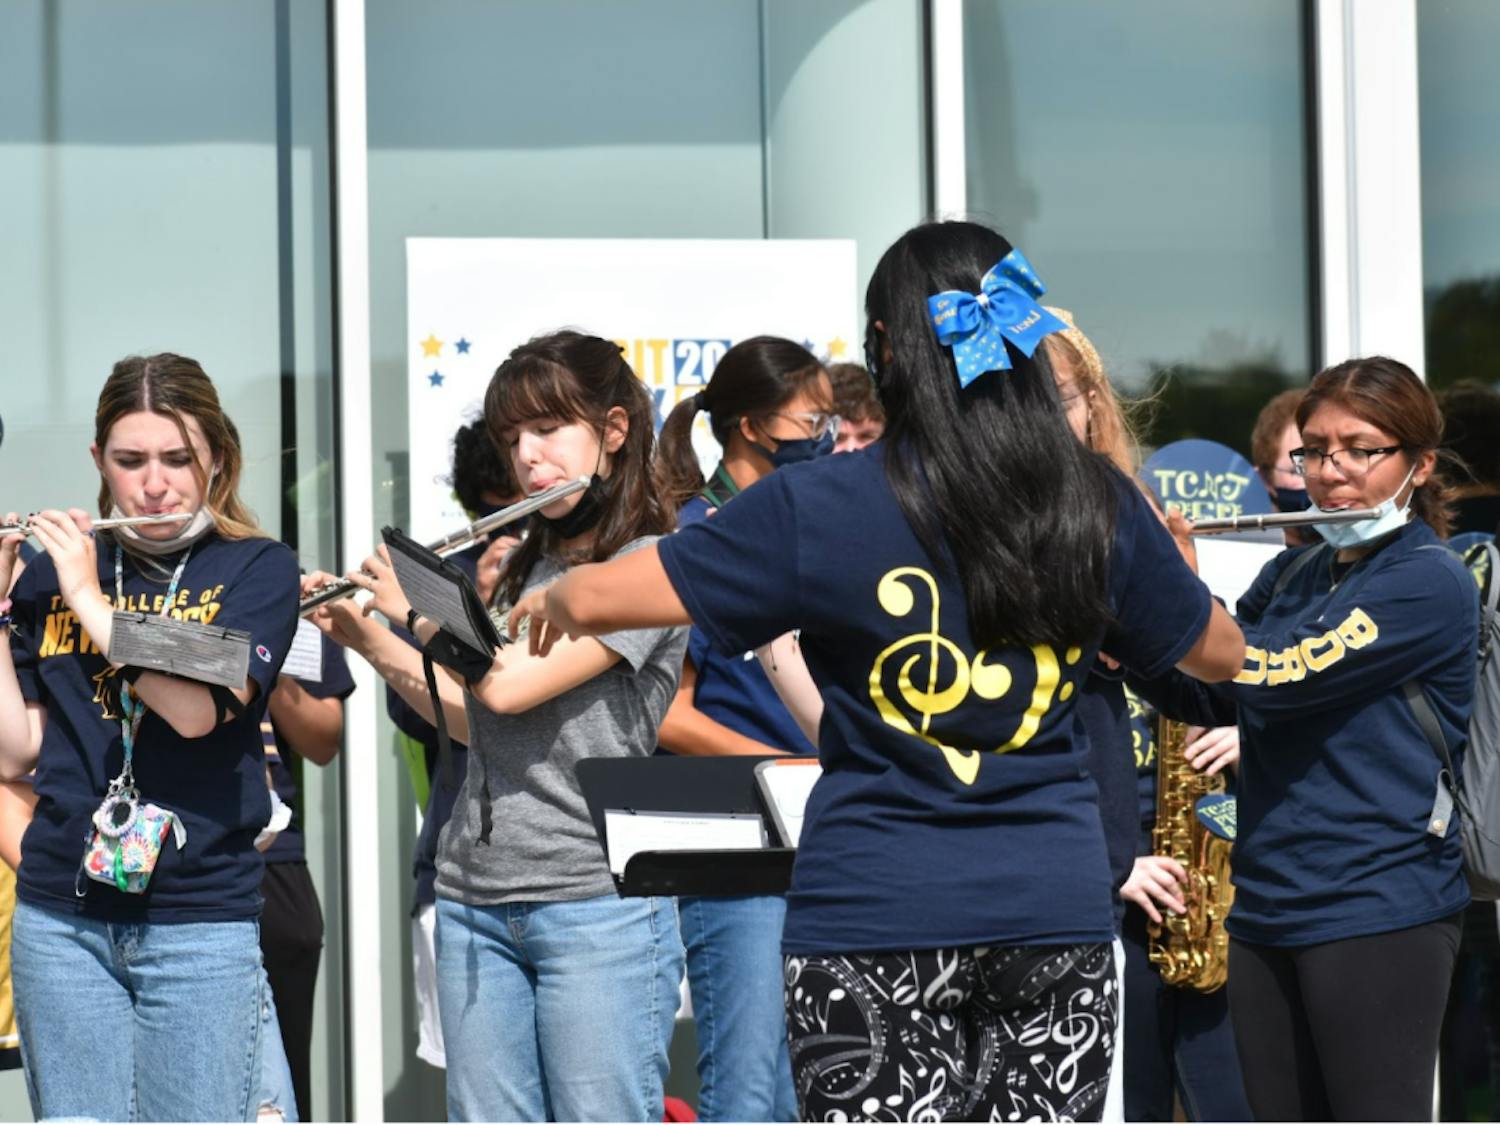 On Oct. 2, the fall 2021 Homecoming, The College Pep Band played their instruments before the head of the football team warned them to stop (photo courtesy of Elisabeth Osekavage/ Photo Editor).